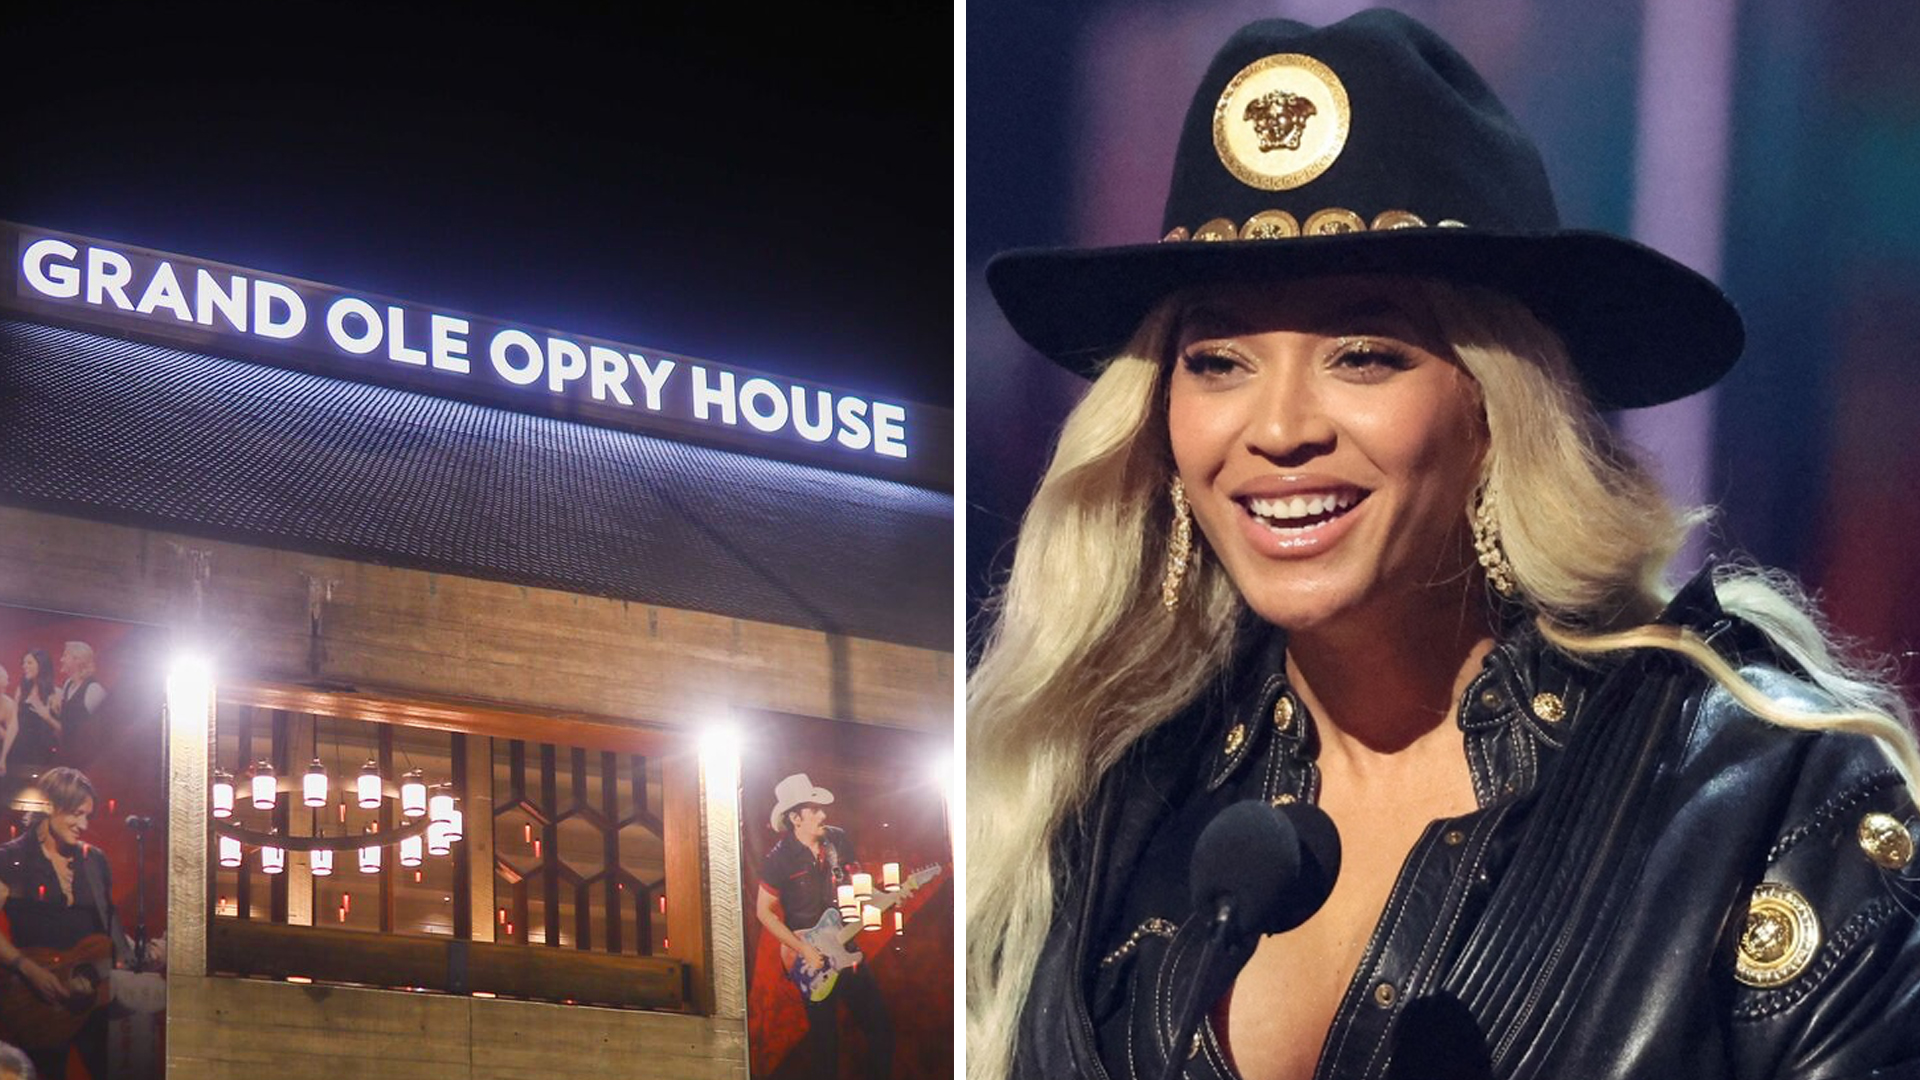 The Grand Ole Opry And Beyonce